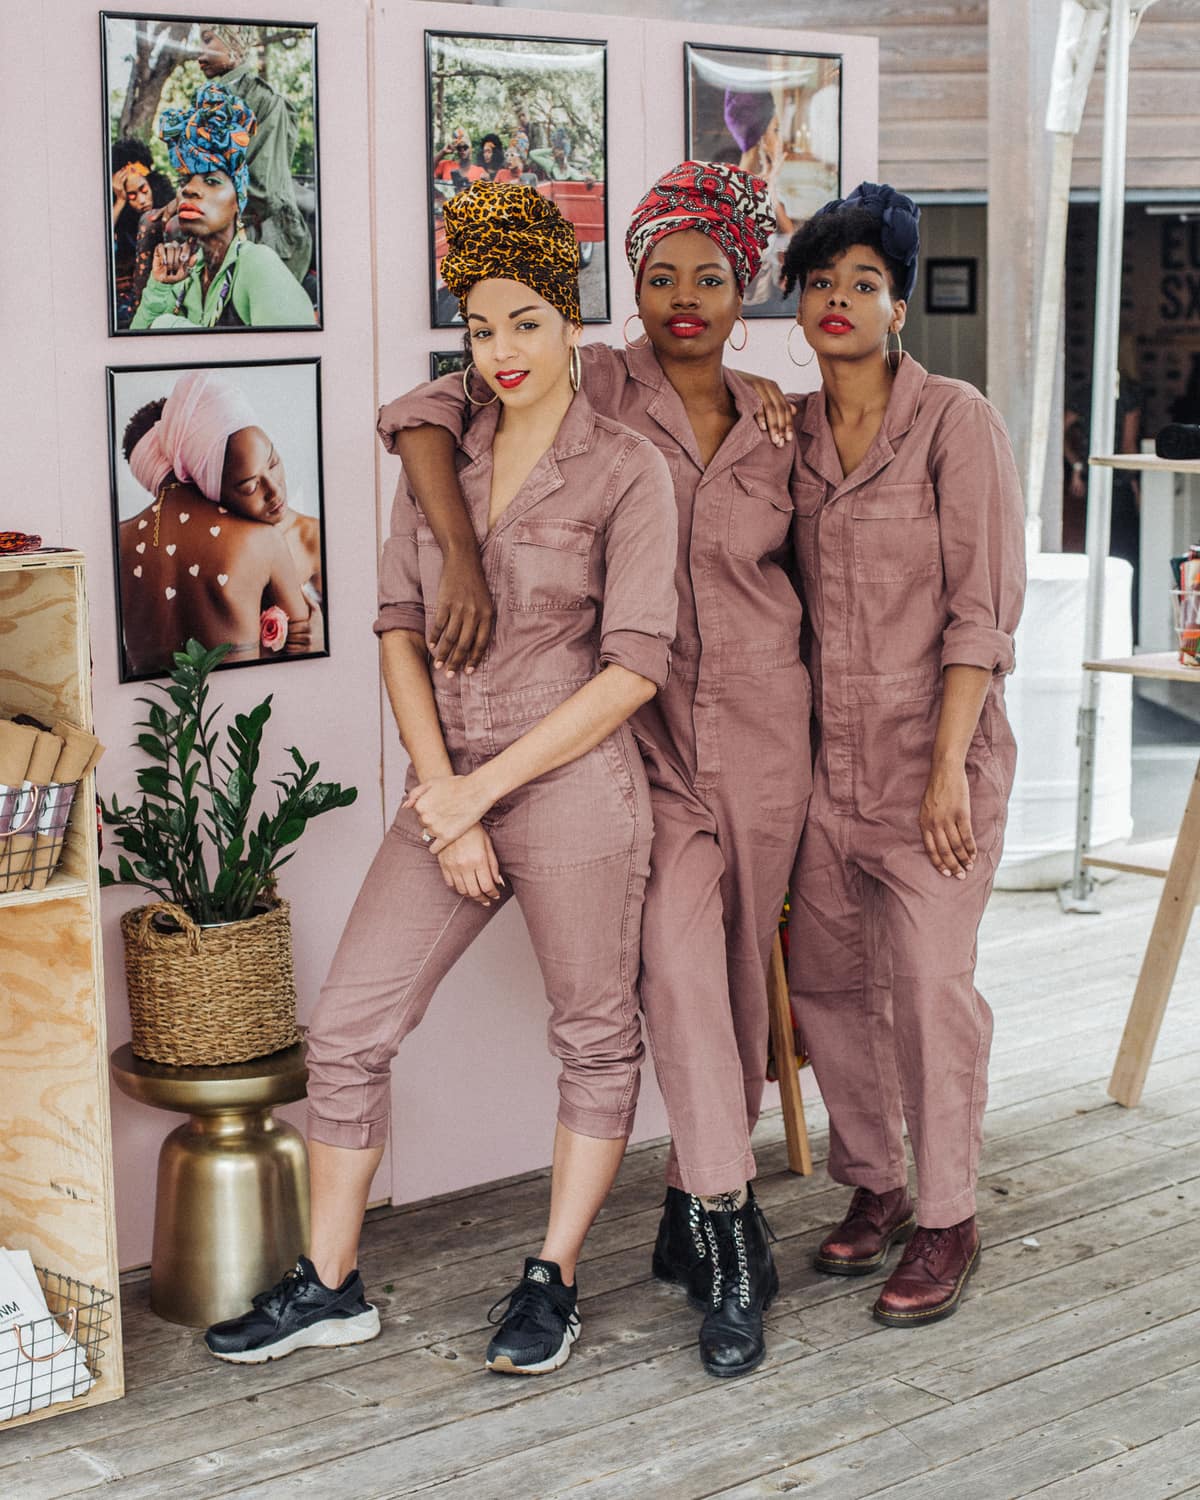 Three women in pink coveralls wearing different-colored head wraps